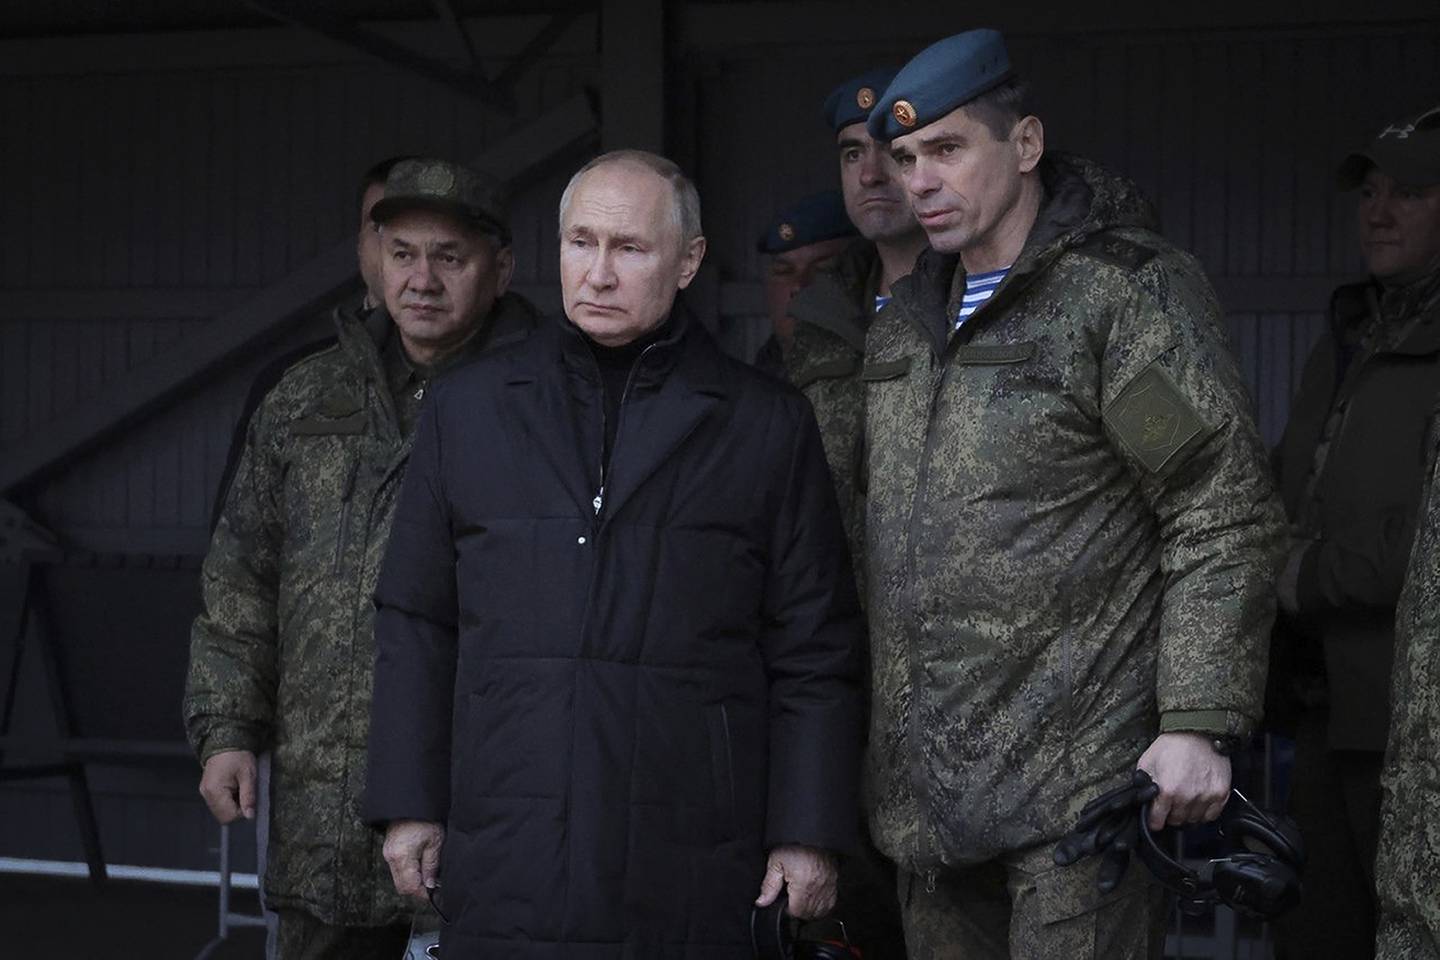 In this handout photo released by Russian Defense Ministry Press Service, Russian President Vladimir Putin, center, Russian Defense Minister Sergei Shoigu, left, and Deputy Commander of the Airborne Troops Anatoly Kontsevoy, visit a military training centre of the Western Military District for mobilised reservists in Ryazan Region, Russia, Thursday, Oct. 20, 2022. (Russian Defense Ministry Press Service via AP)